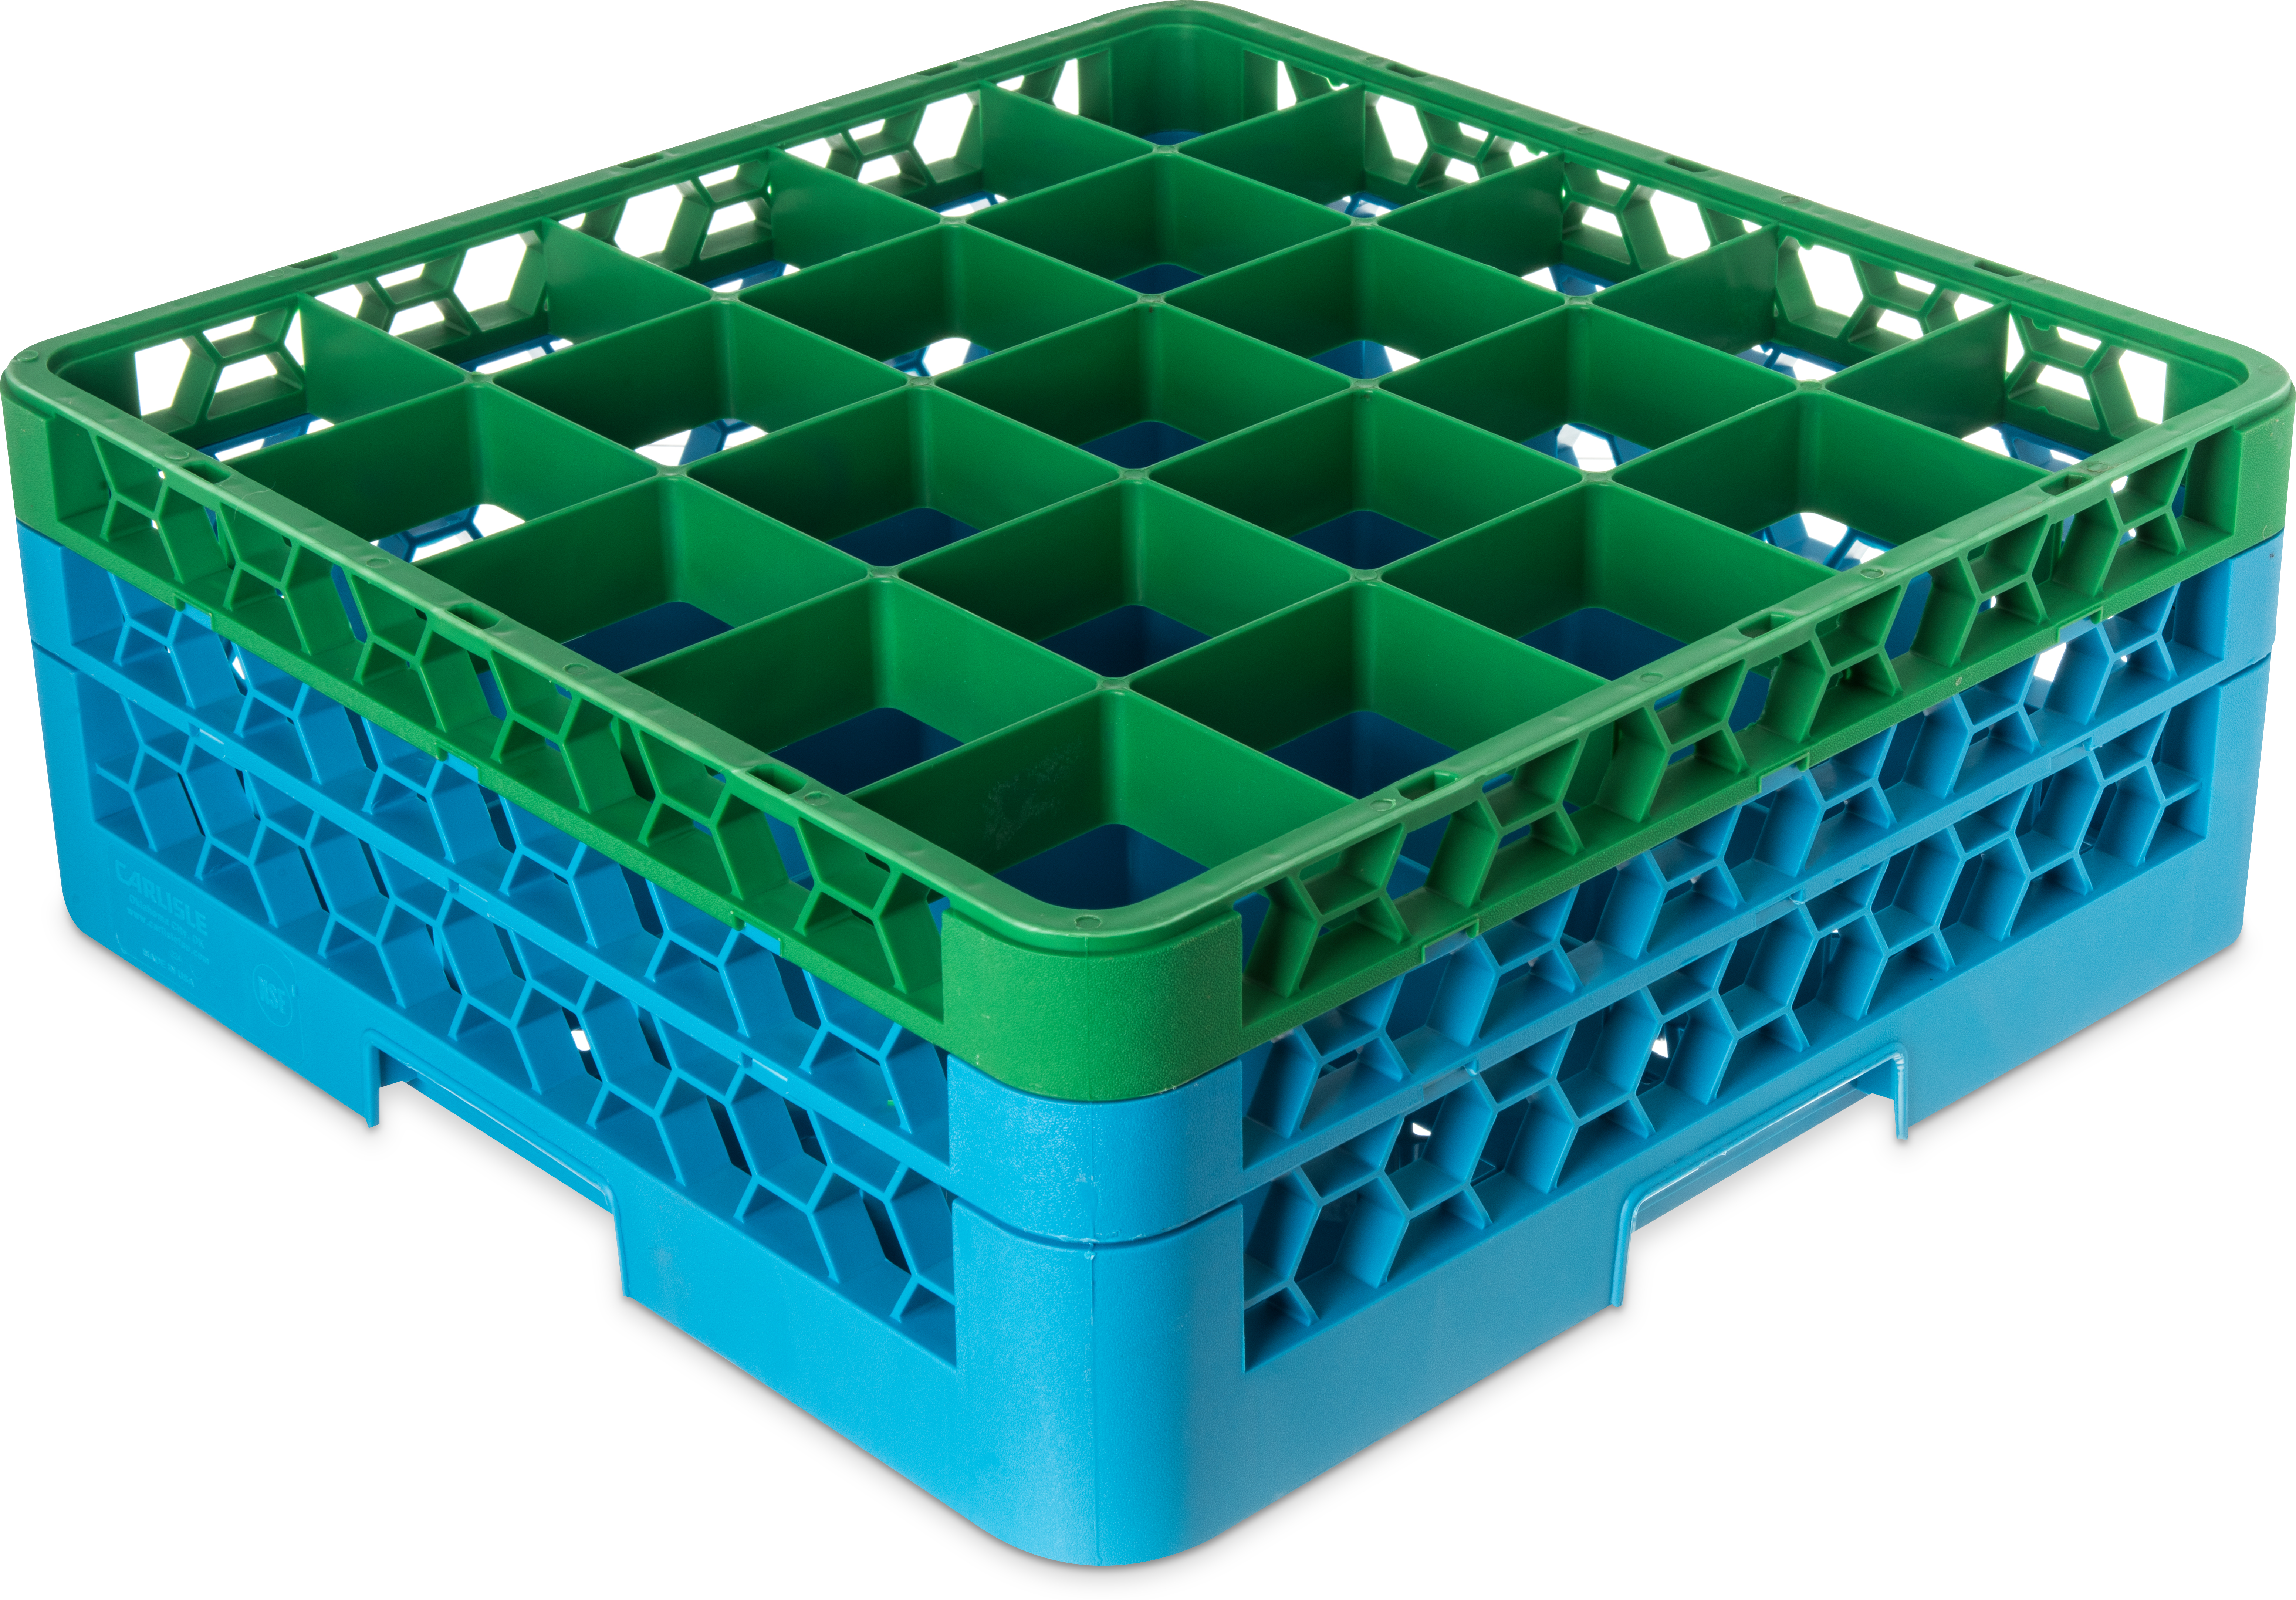 OptiClean 25 Compartment Glass Rack with 2 Extenders 7.12 - Green-Carlisle Blue